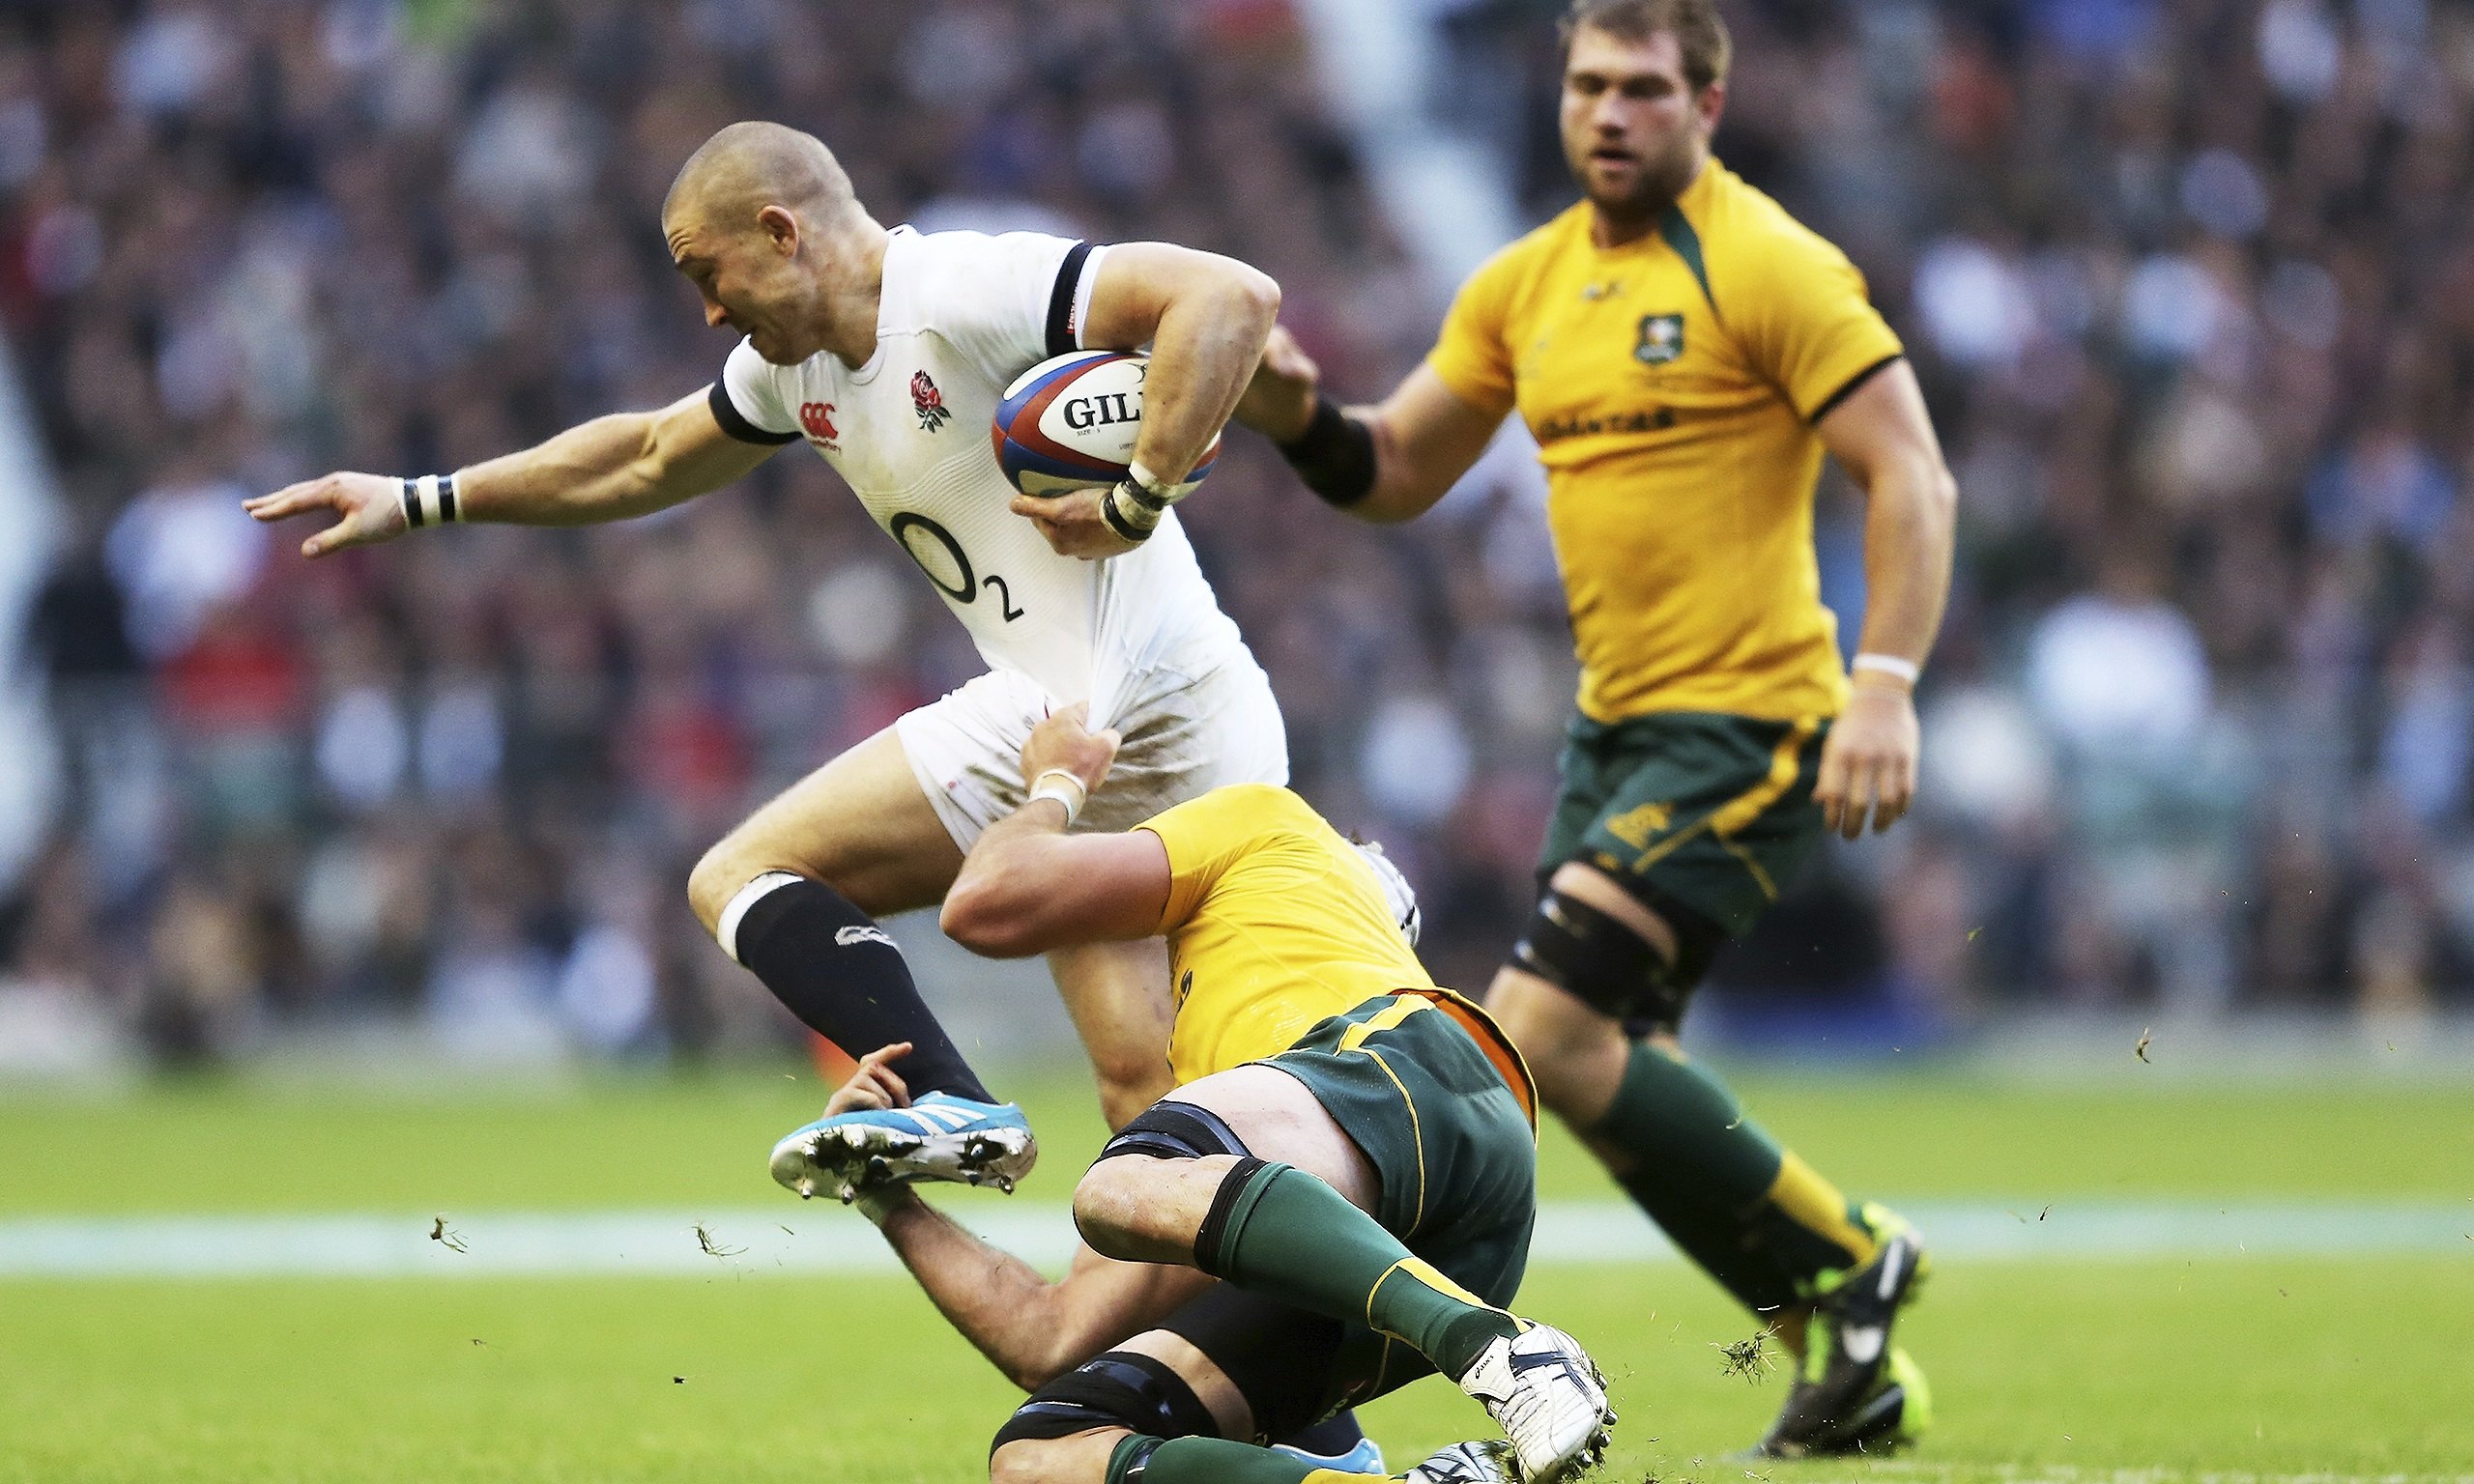 Watch The England Rugby Game Live